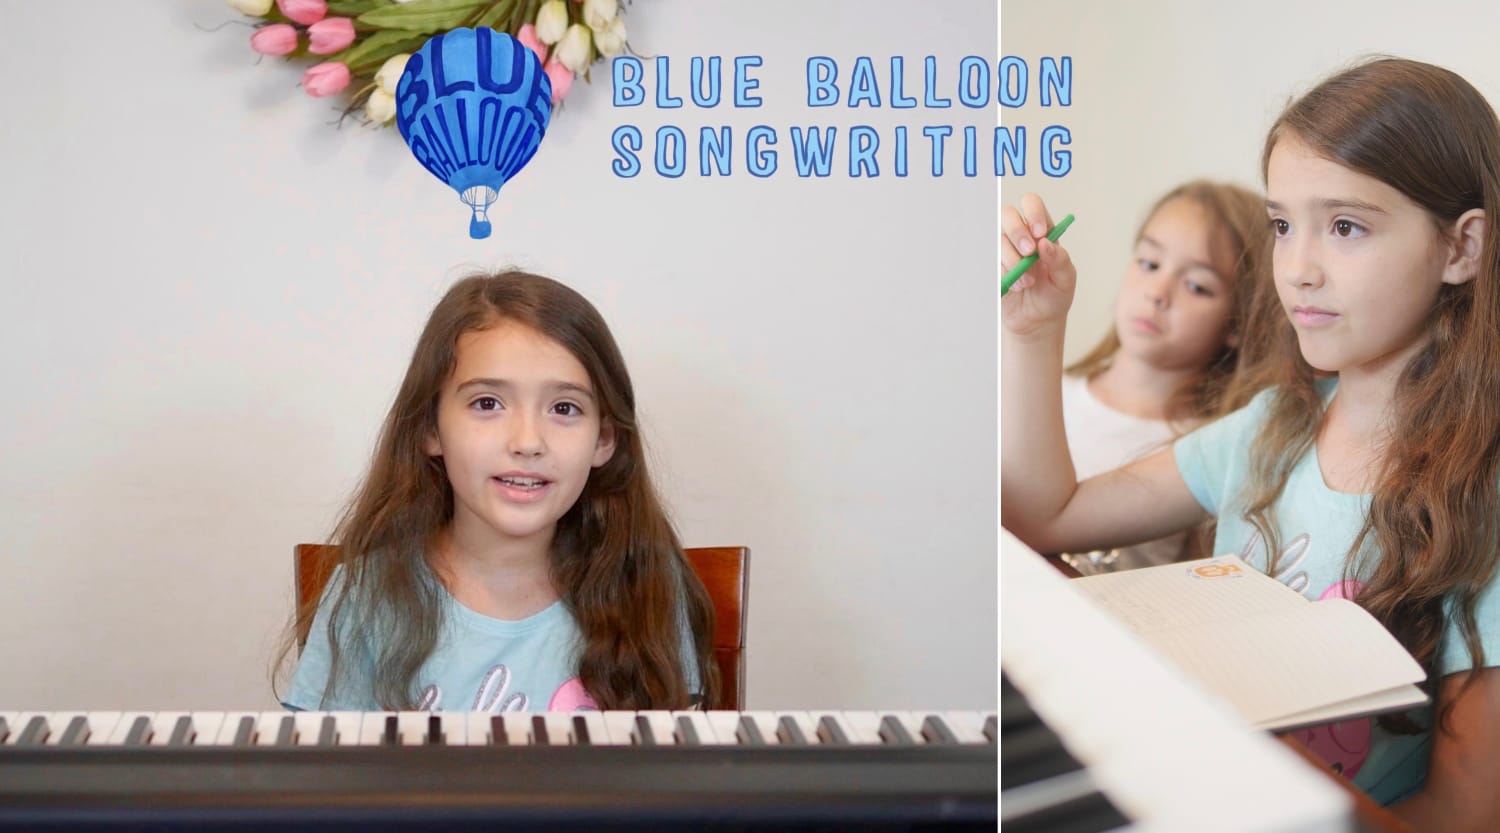 Our Blue Balloon Songwriting Lesson Experience